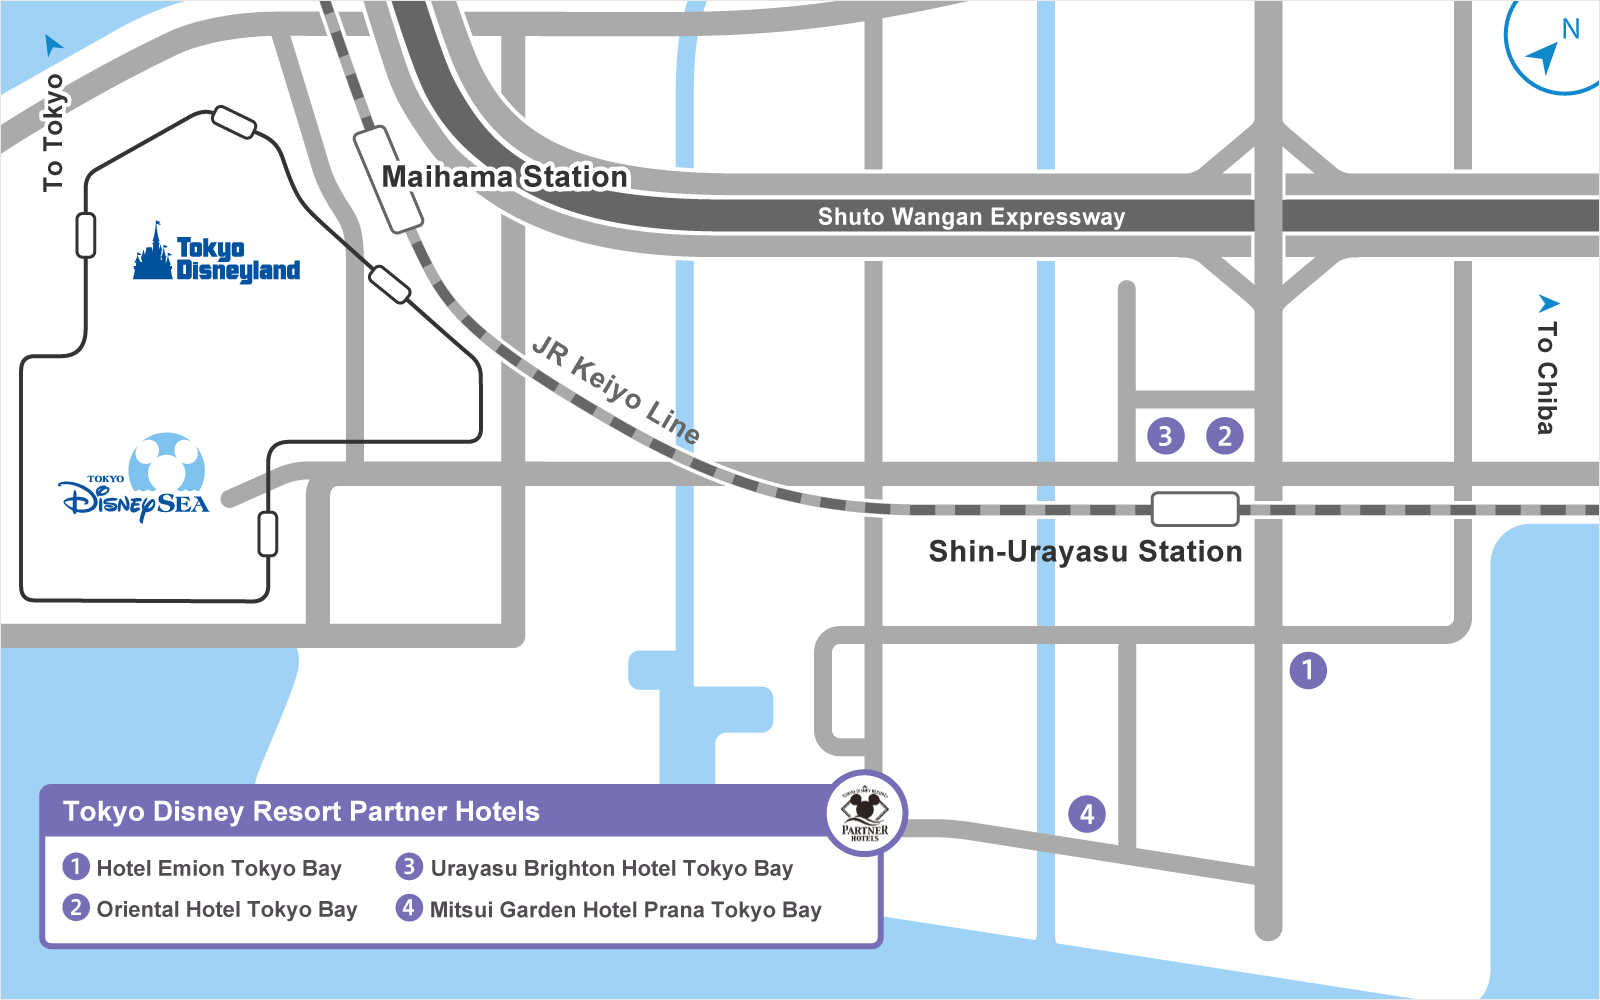 General location of the hotels